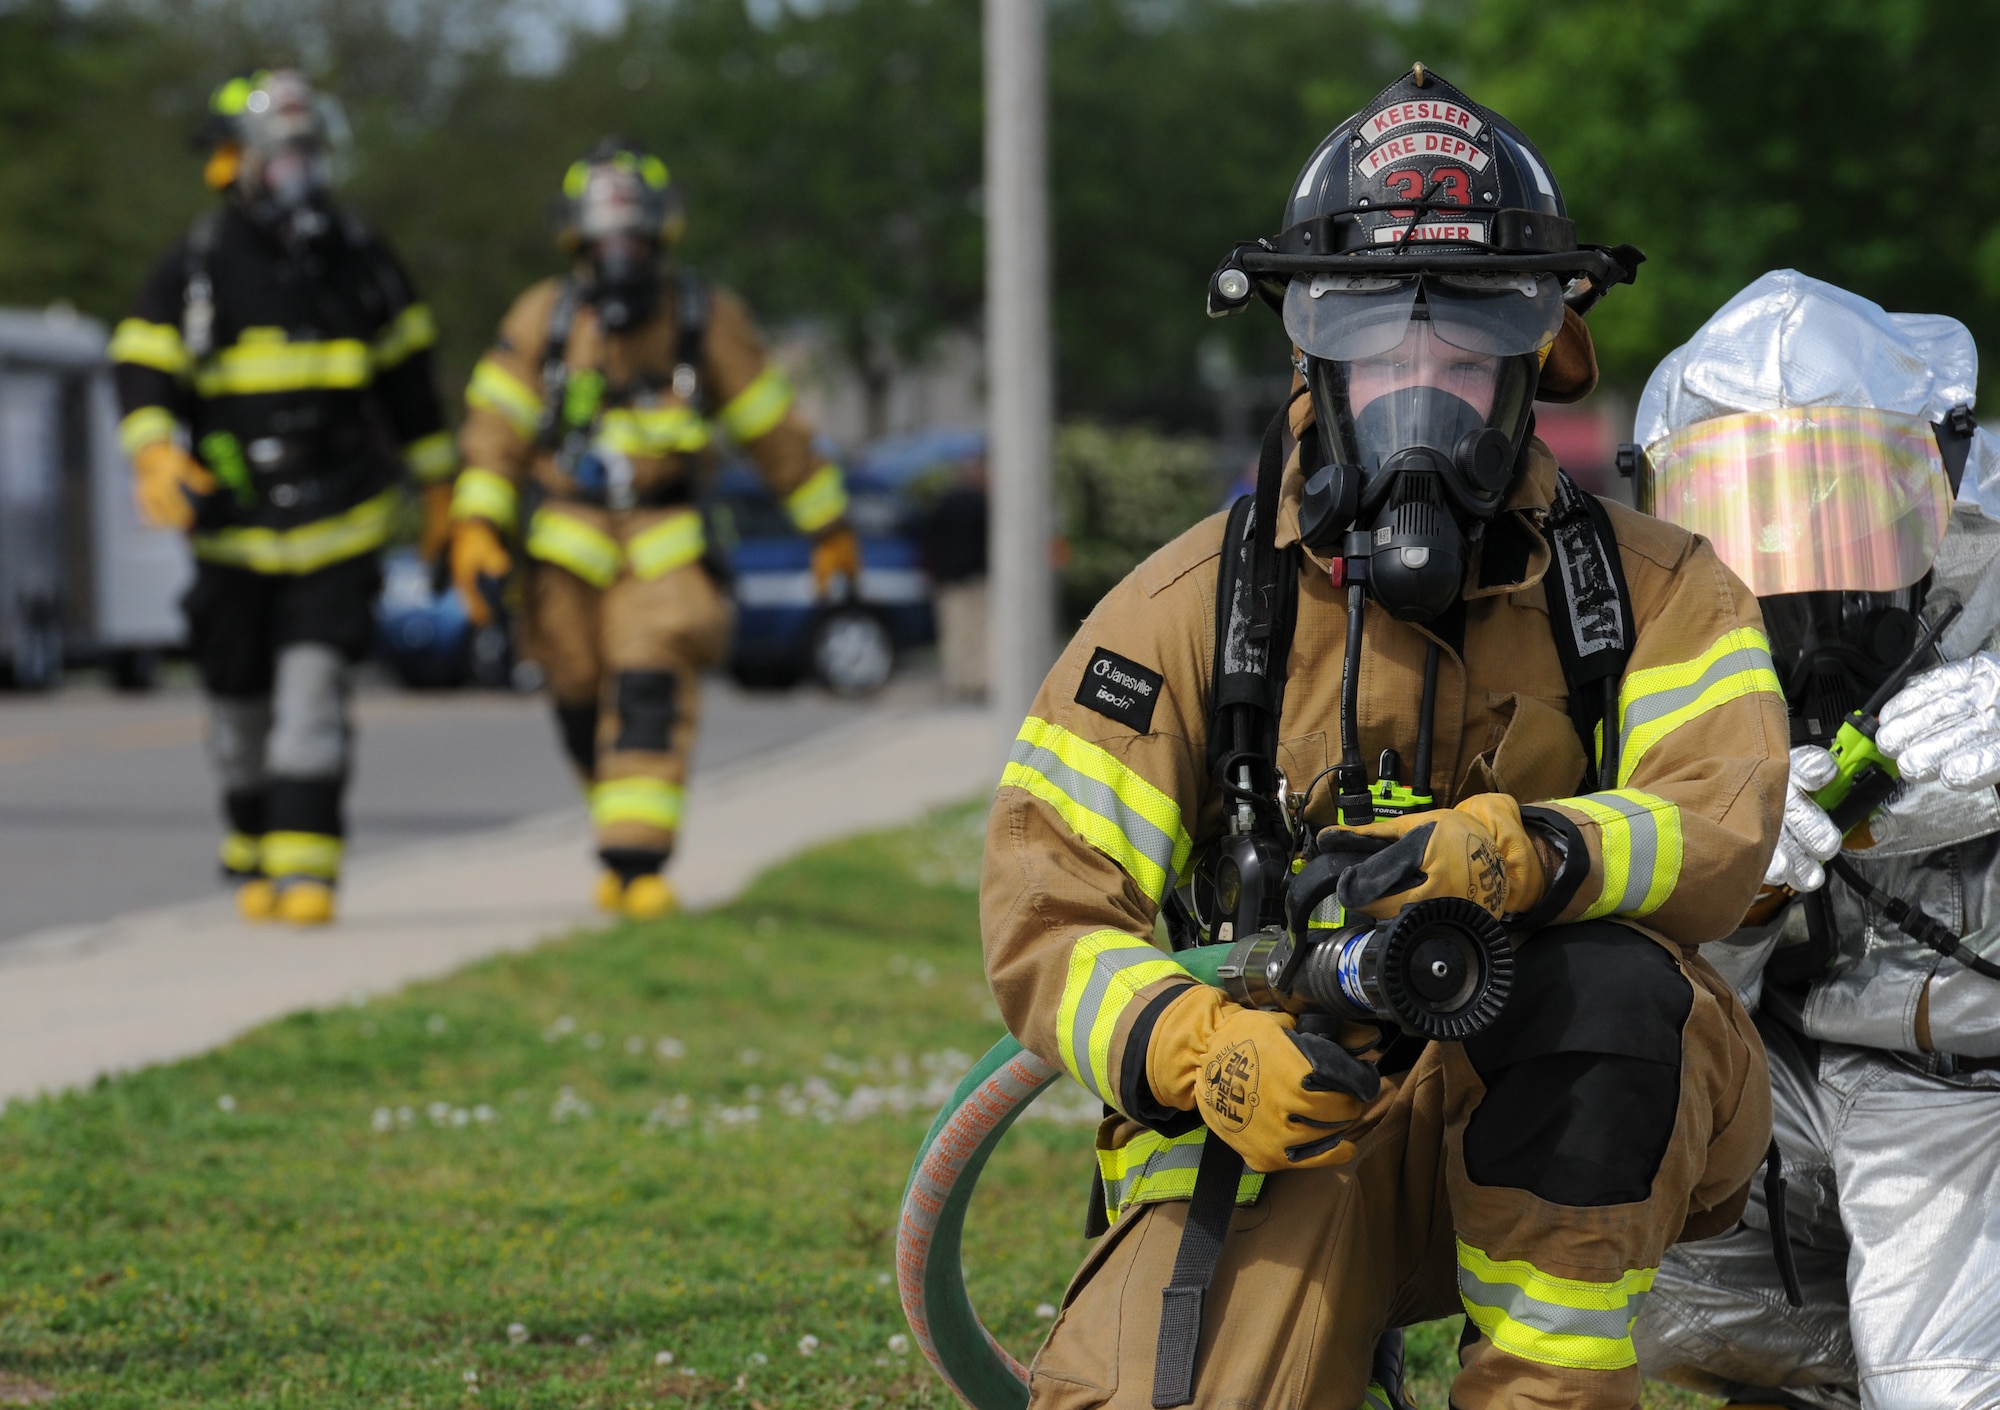 Senior Airman Codee Potts, 81st Infrastructure Division firefighter, prepares to use a fire hose during a Chemical, Biological, Radiological, Nuclear and Explosive exercise scenario, April 21, 2016, Keesler Air Force Base, Miss. The Force Protection Condition exercise scenario simulated an intruder entering the hazardous waste 90-day accumulation site, where an explosion occurred causing a mass casualty event. The exercise tested the base’s capability to react to and recover from a mass casualty event. (U.S. Air Force photo by Kemberly Groue)